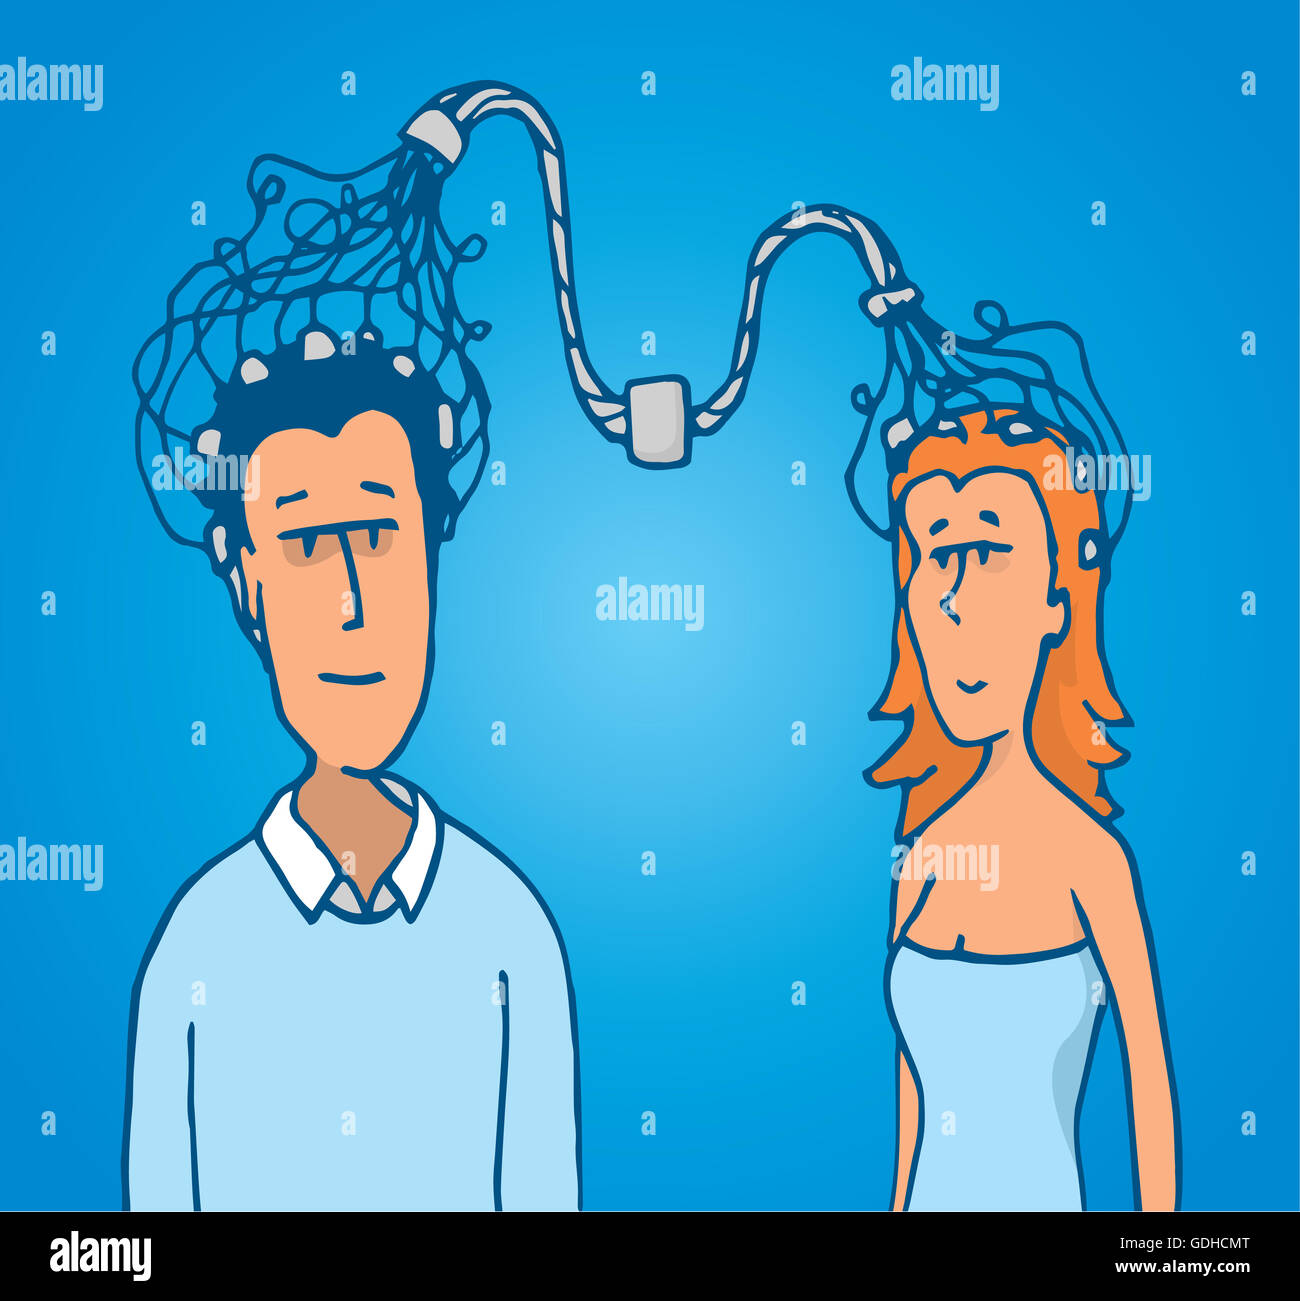 Cartoon illustration of connection between man and woman brains Stock Photo